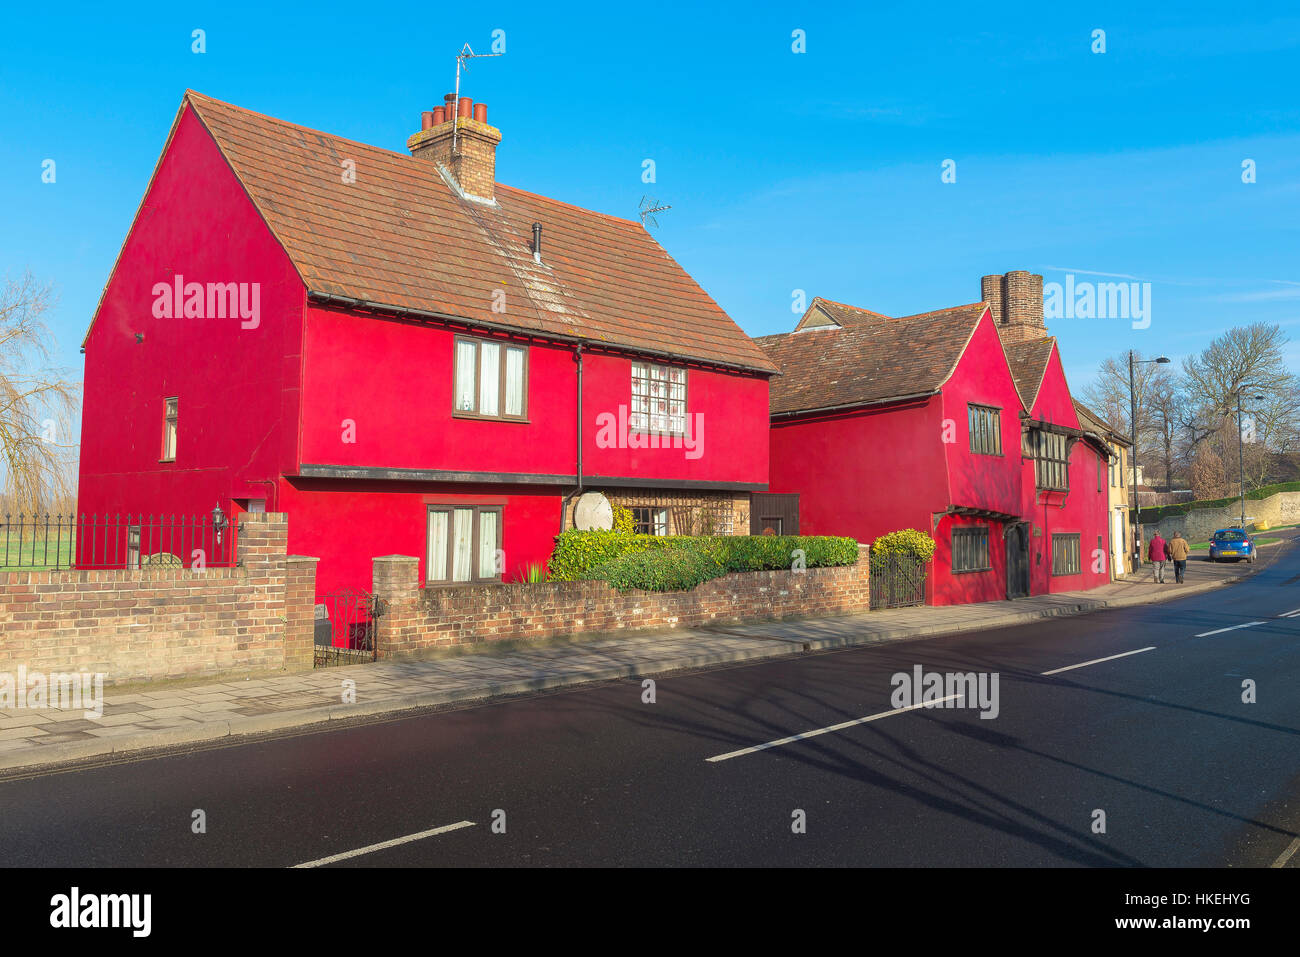 Suffolk UK architecture, view of a medieval town house painted red in Sudbury, Suffolk, East Anglia, UK. Stock Photo